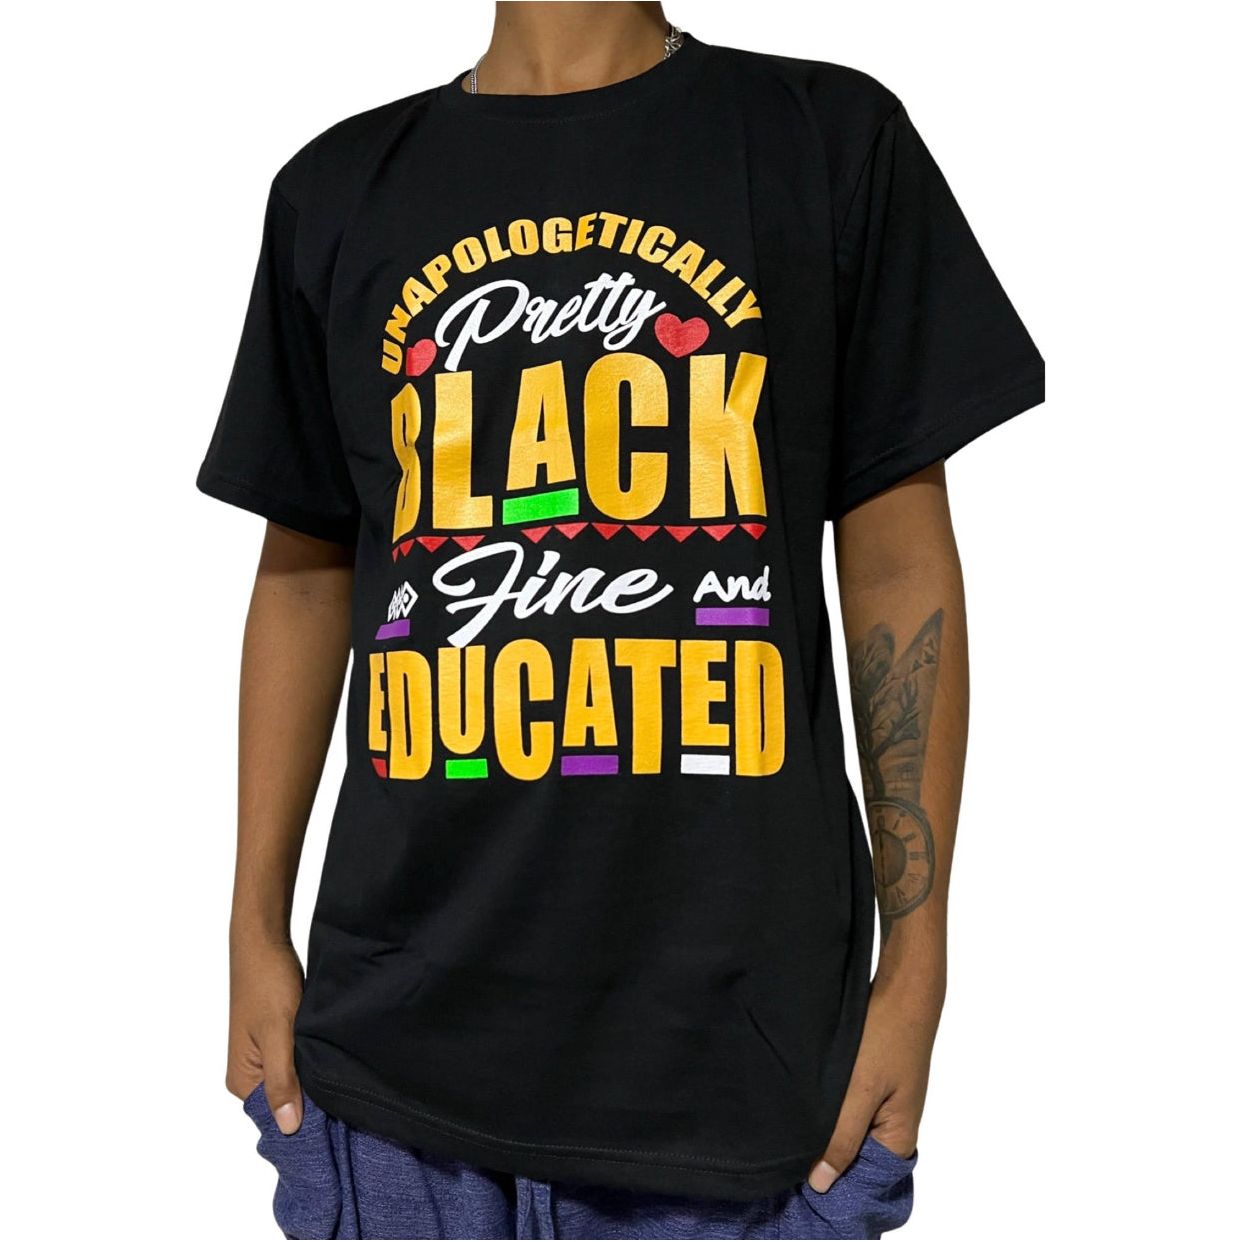 Shirt- Pretty Black Fine and Educated.